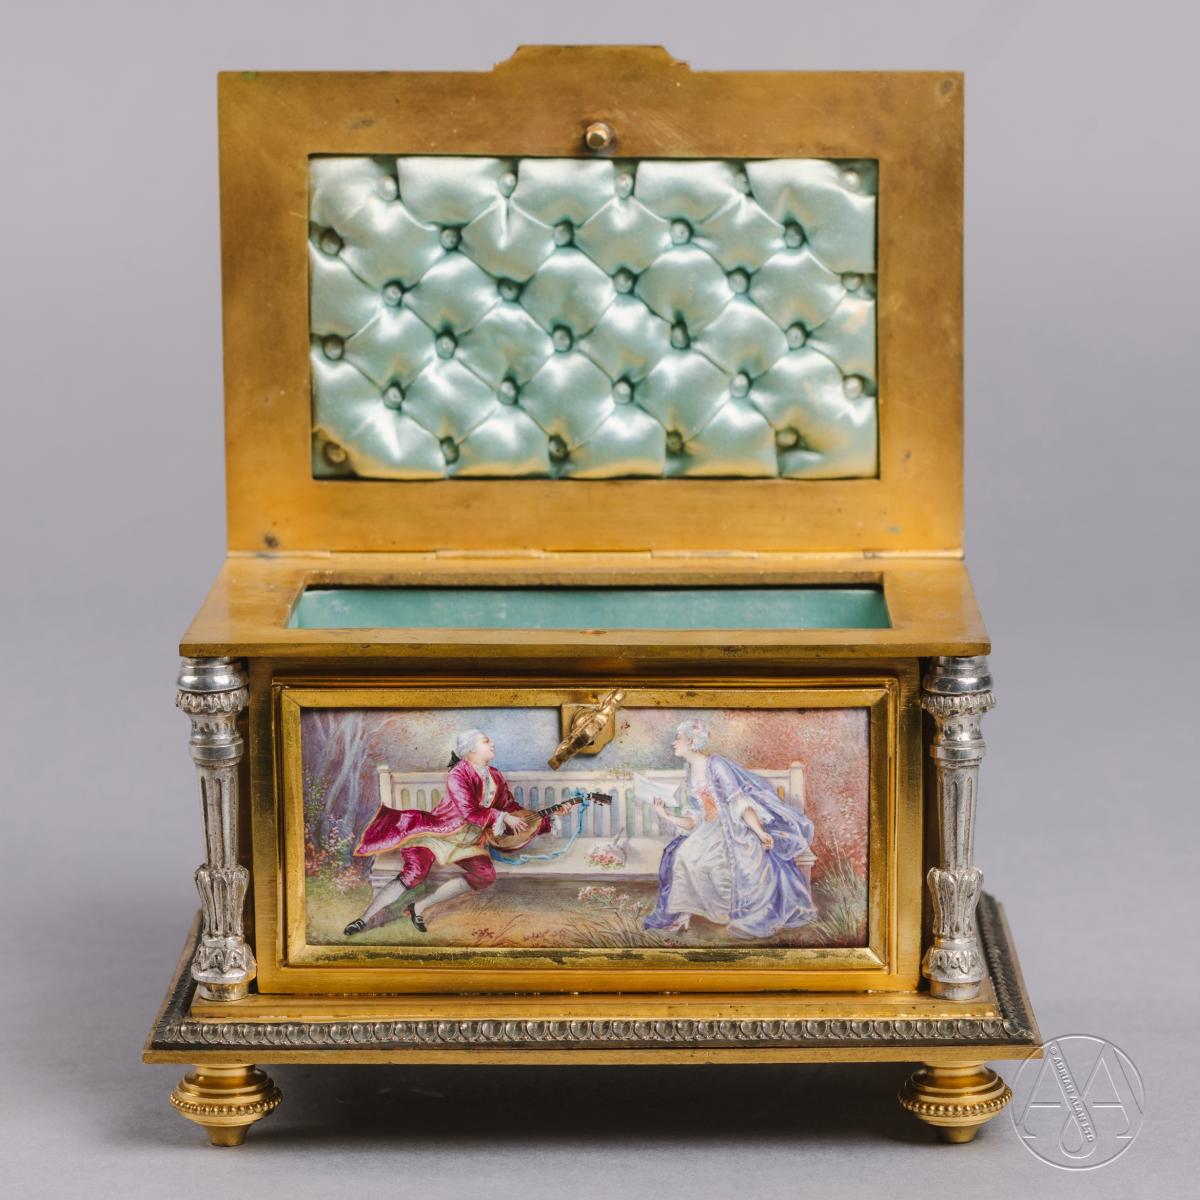 A Sèvres Style Porcelain Jewellery Box Dating From Circa 1890